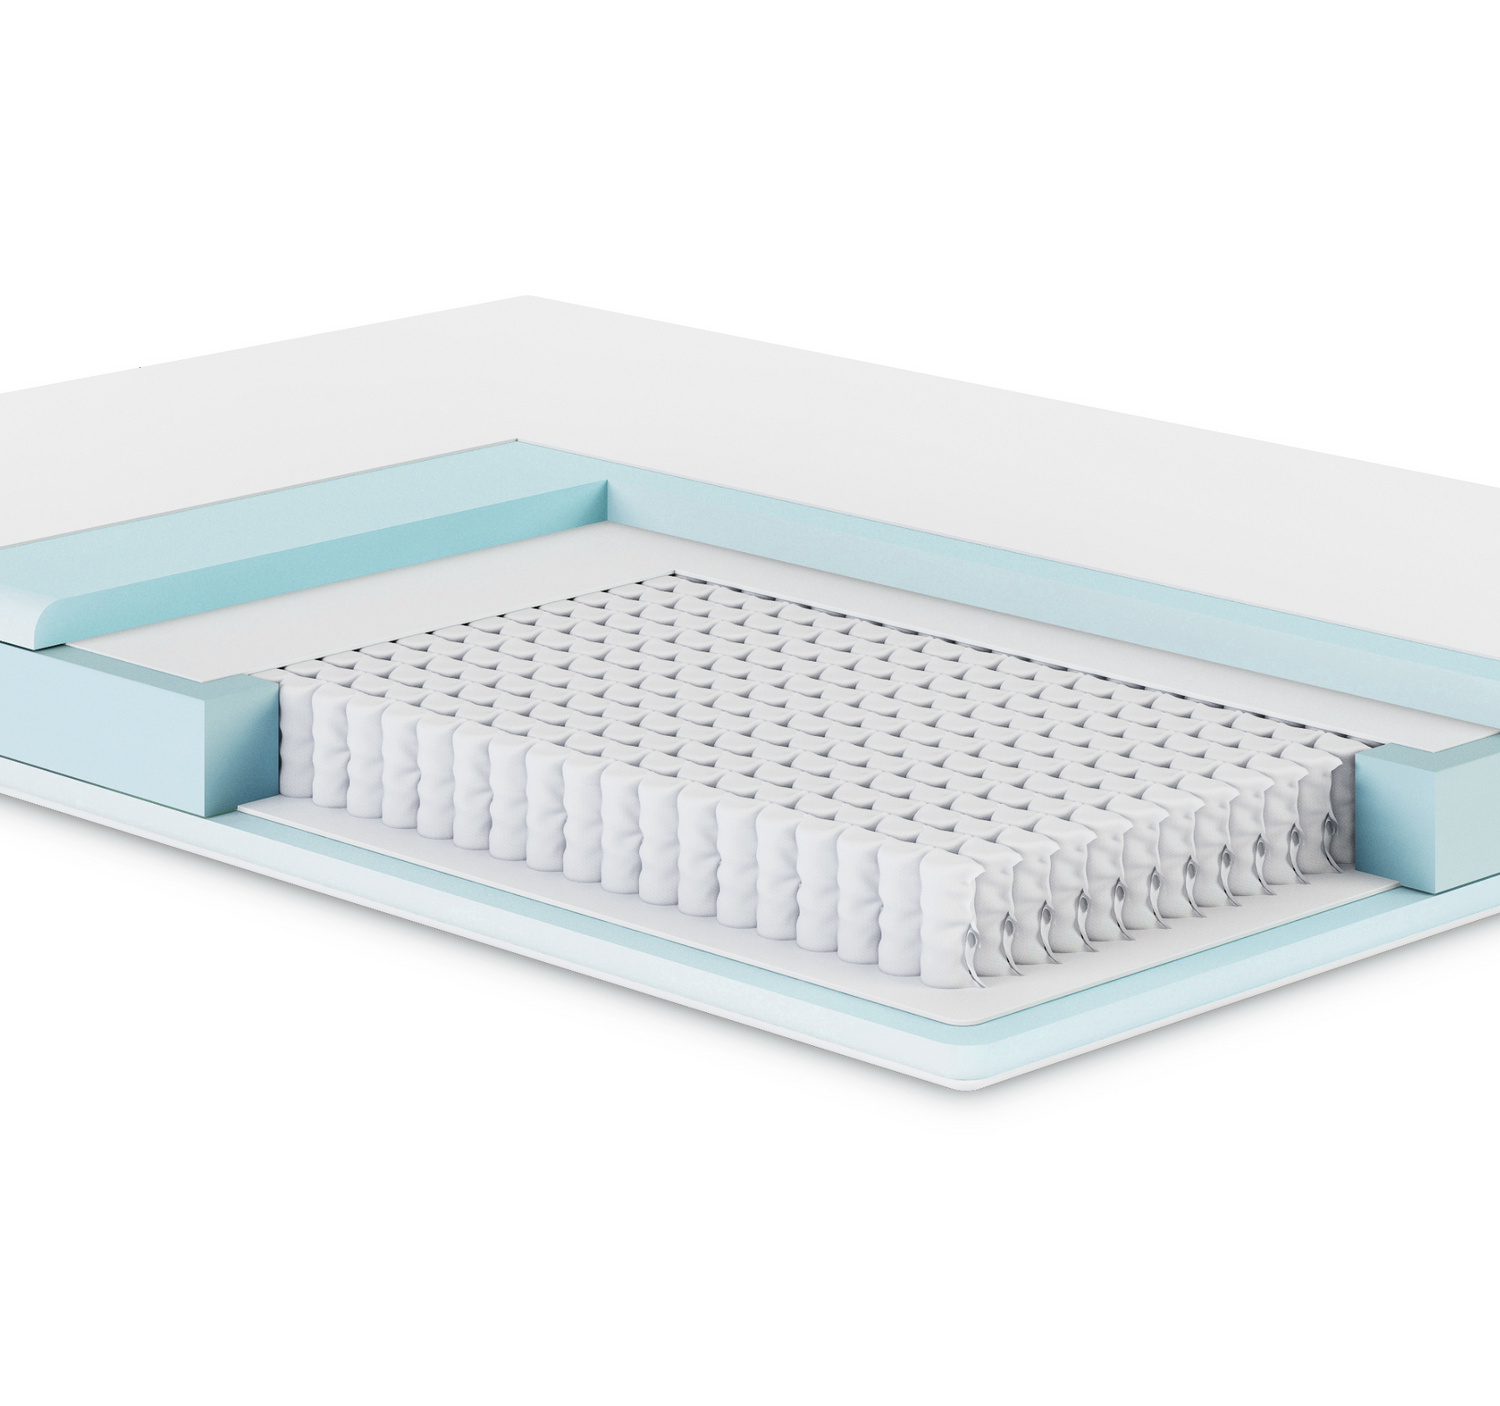 Vector illustration of a CoolSense mattress with a cutaway section revealing its internal construction, featuring pocket springs and CoolSense foam layers for advanced comfort and support.